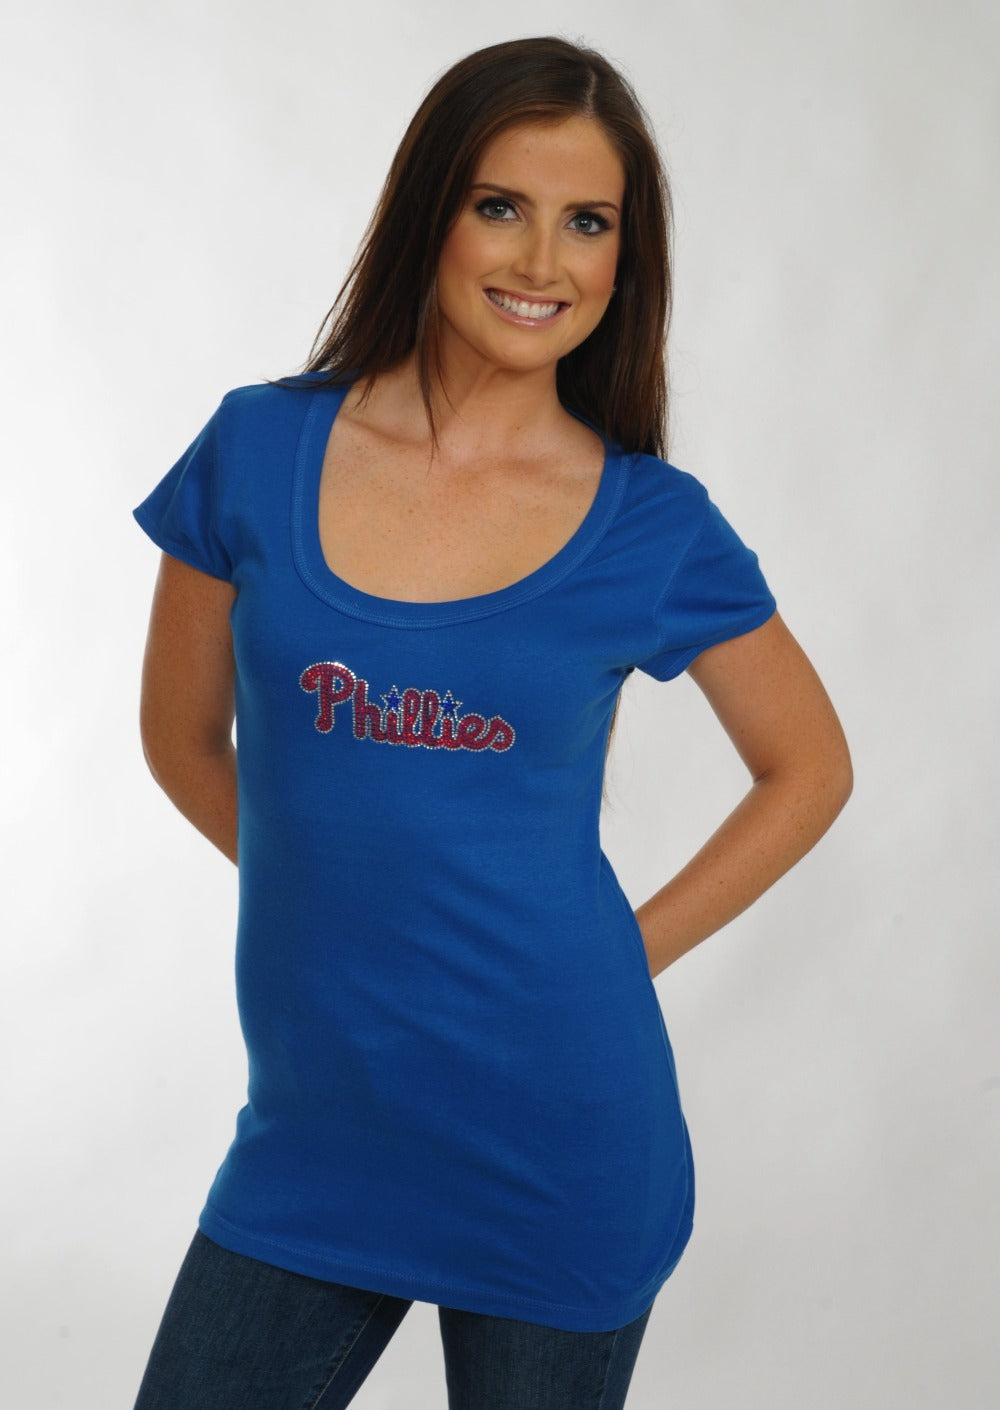 Philadelphia Phillies Scoop Neck Bling Top Royal Blue for Women (Free – The  Pink Firefly